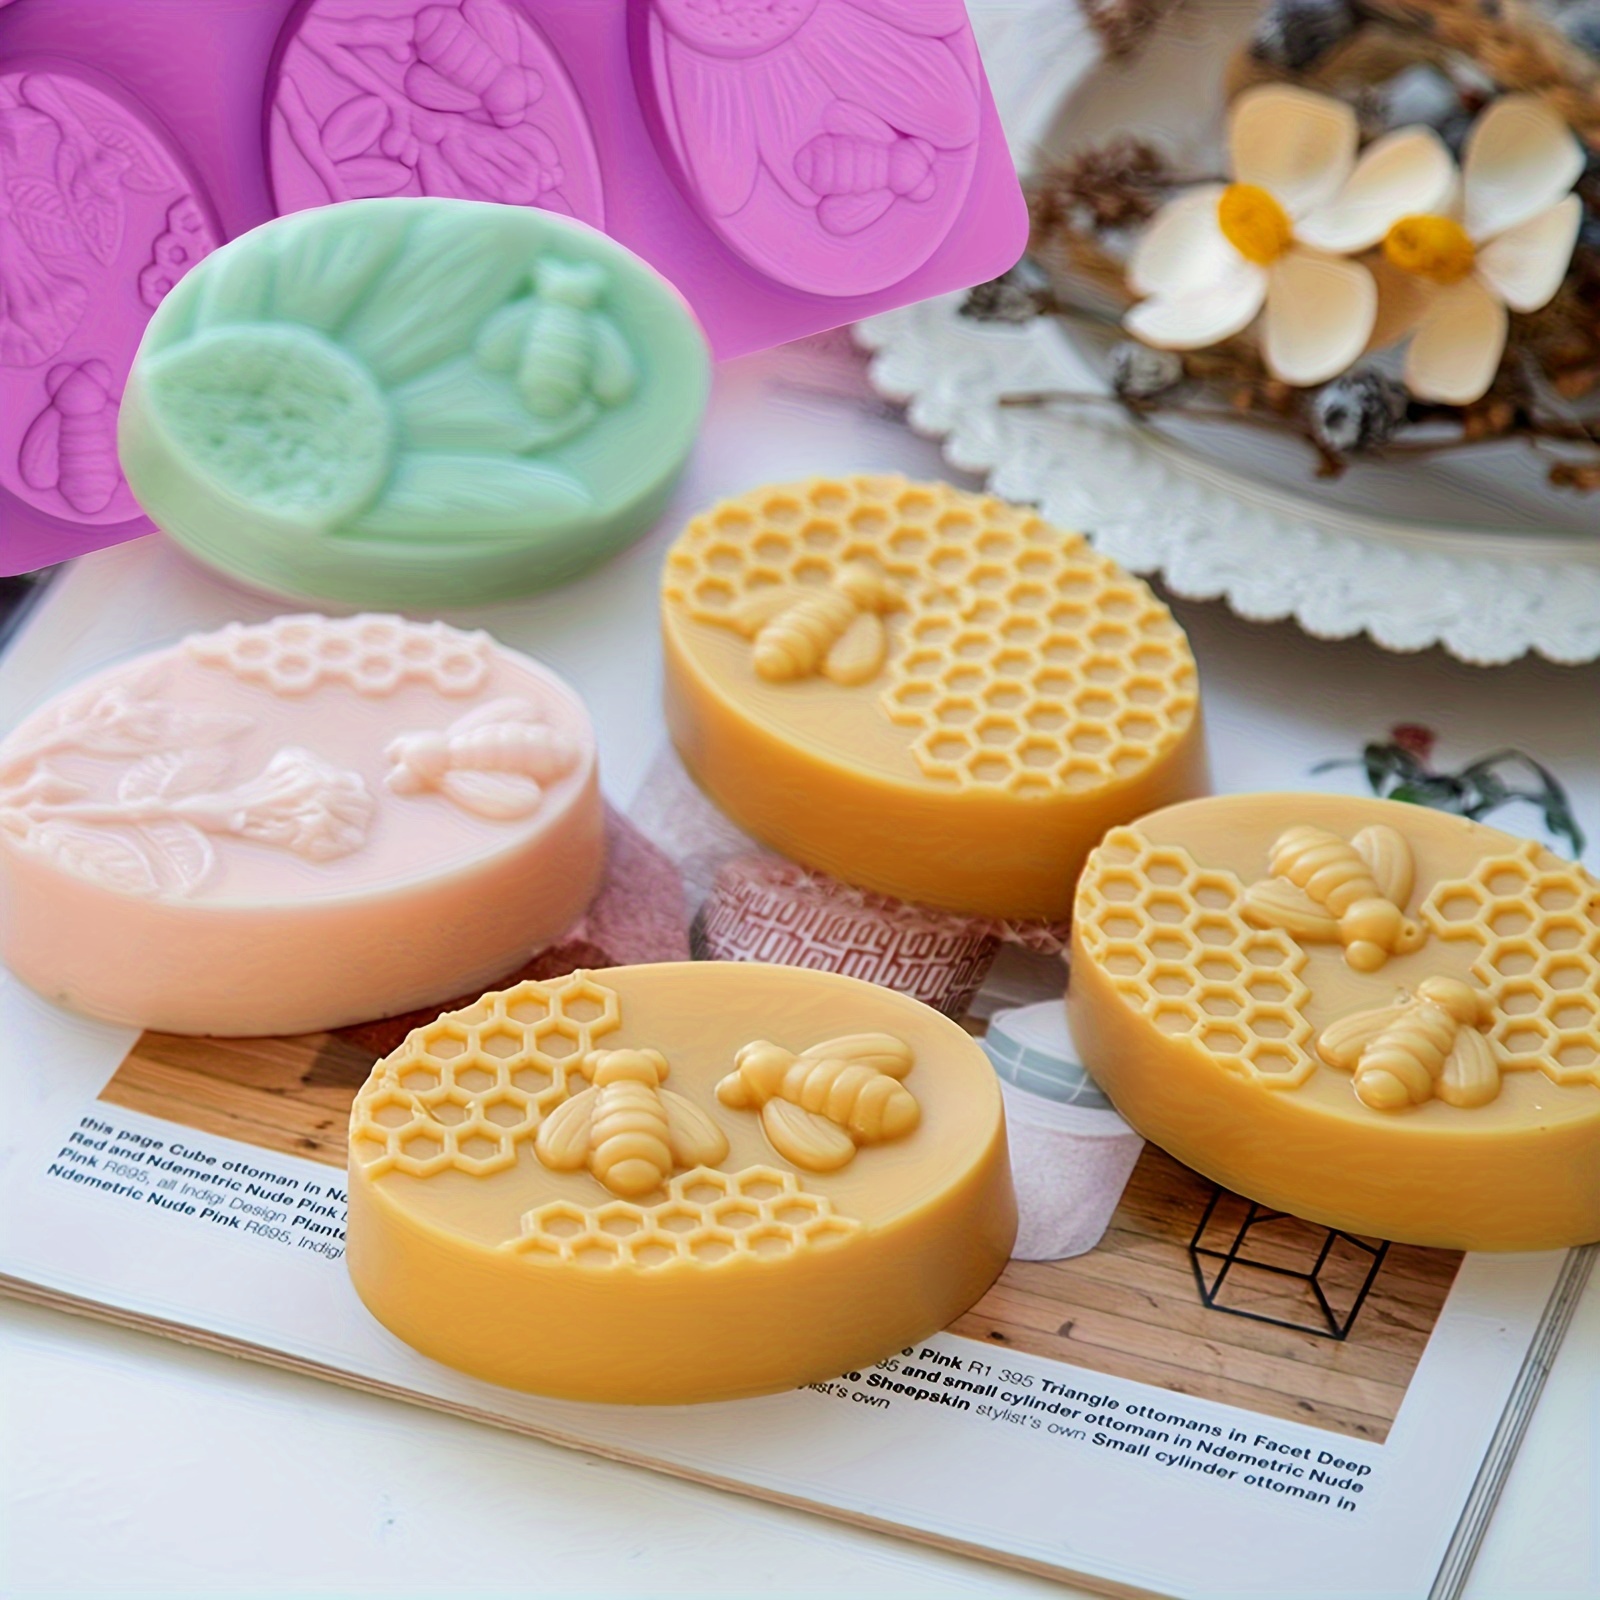 Silicone Soap Molds, 6 Cavities Diy Handmade Soap Molds - Cake Pan